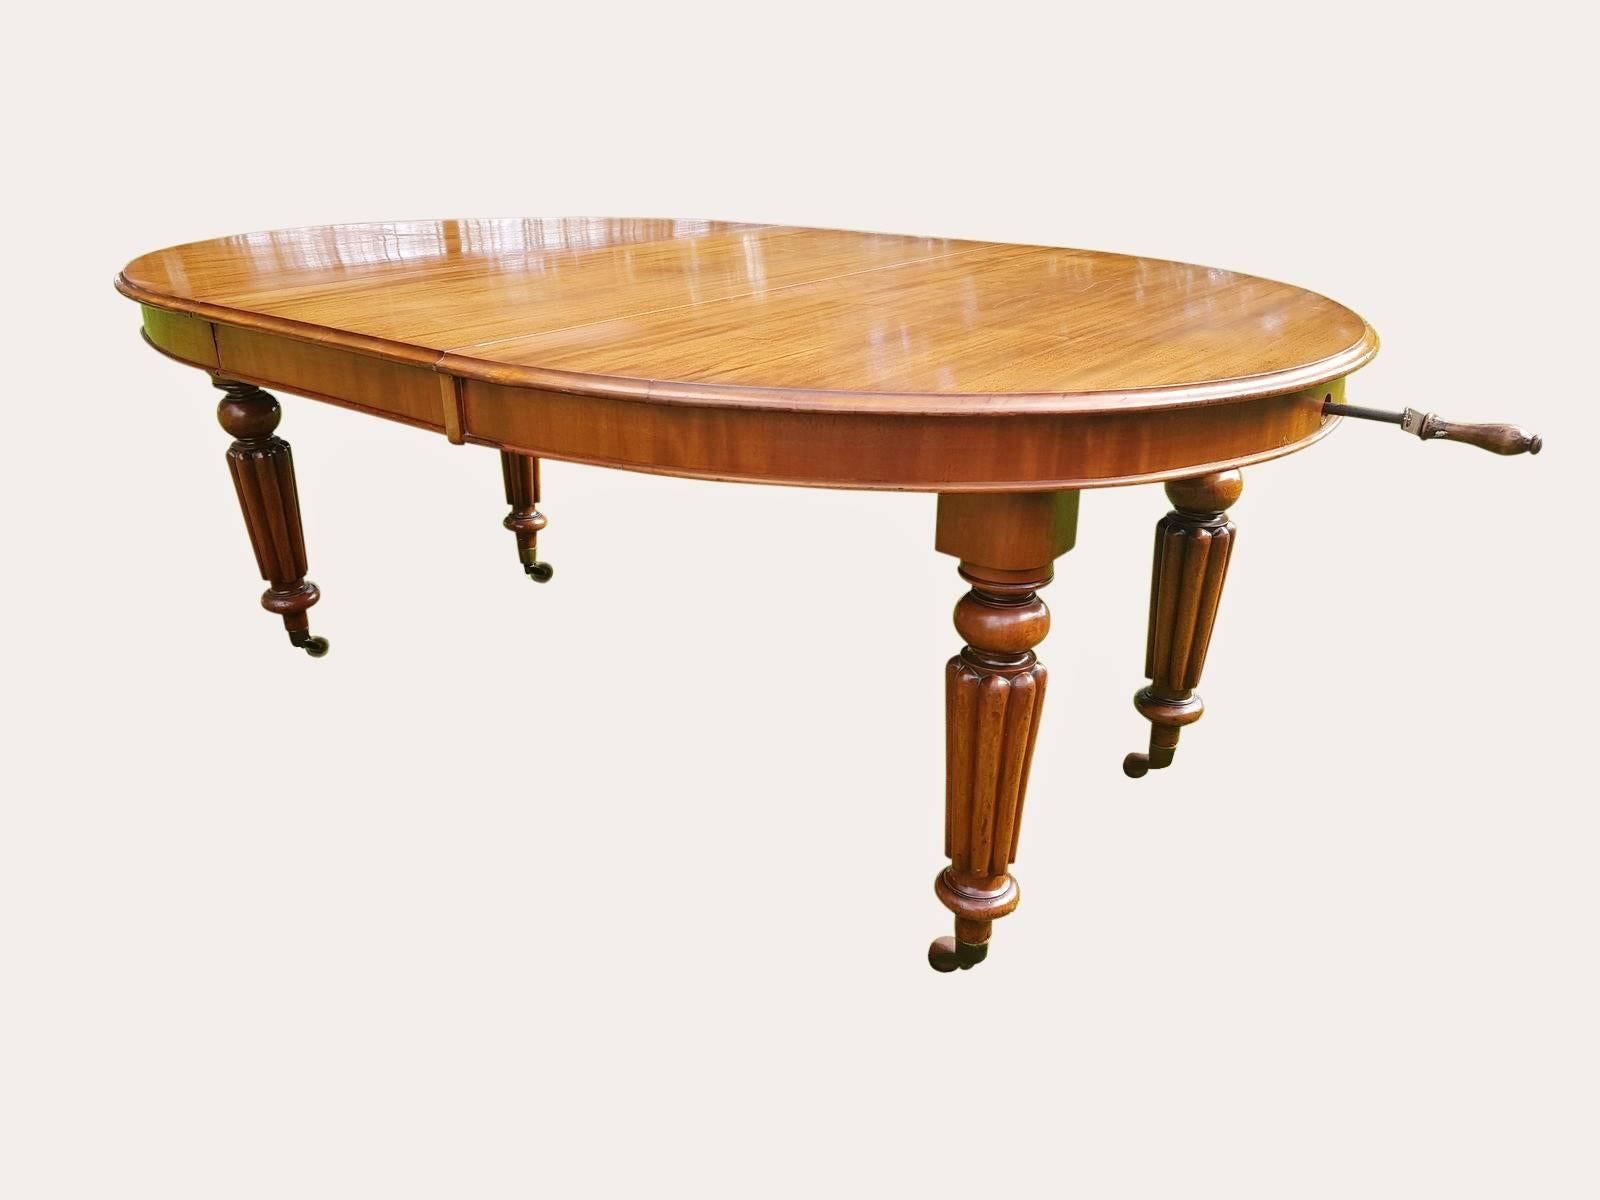 Very good quality antique Victorian Mahogany wind out dining table, with an extra leaf. The colour is a well figured Mahogany, and being original of mellow color. 

The table stands on reeded and carved legs with the original castors.  As can be